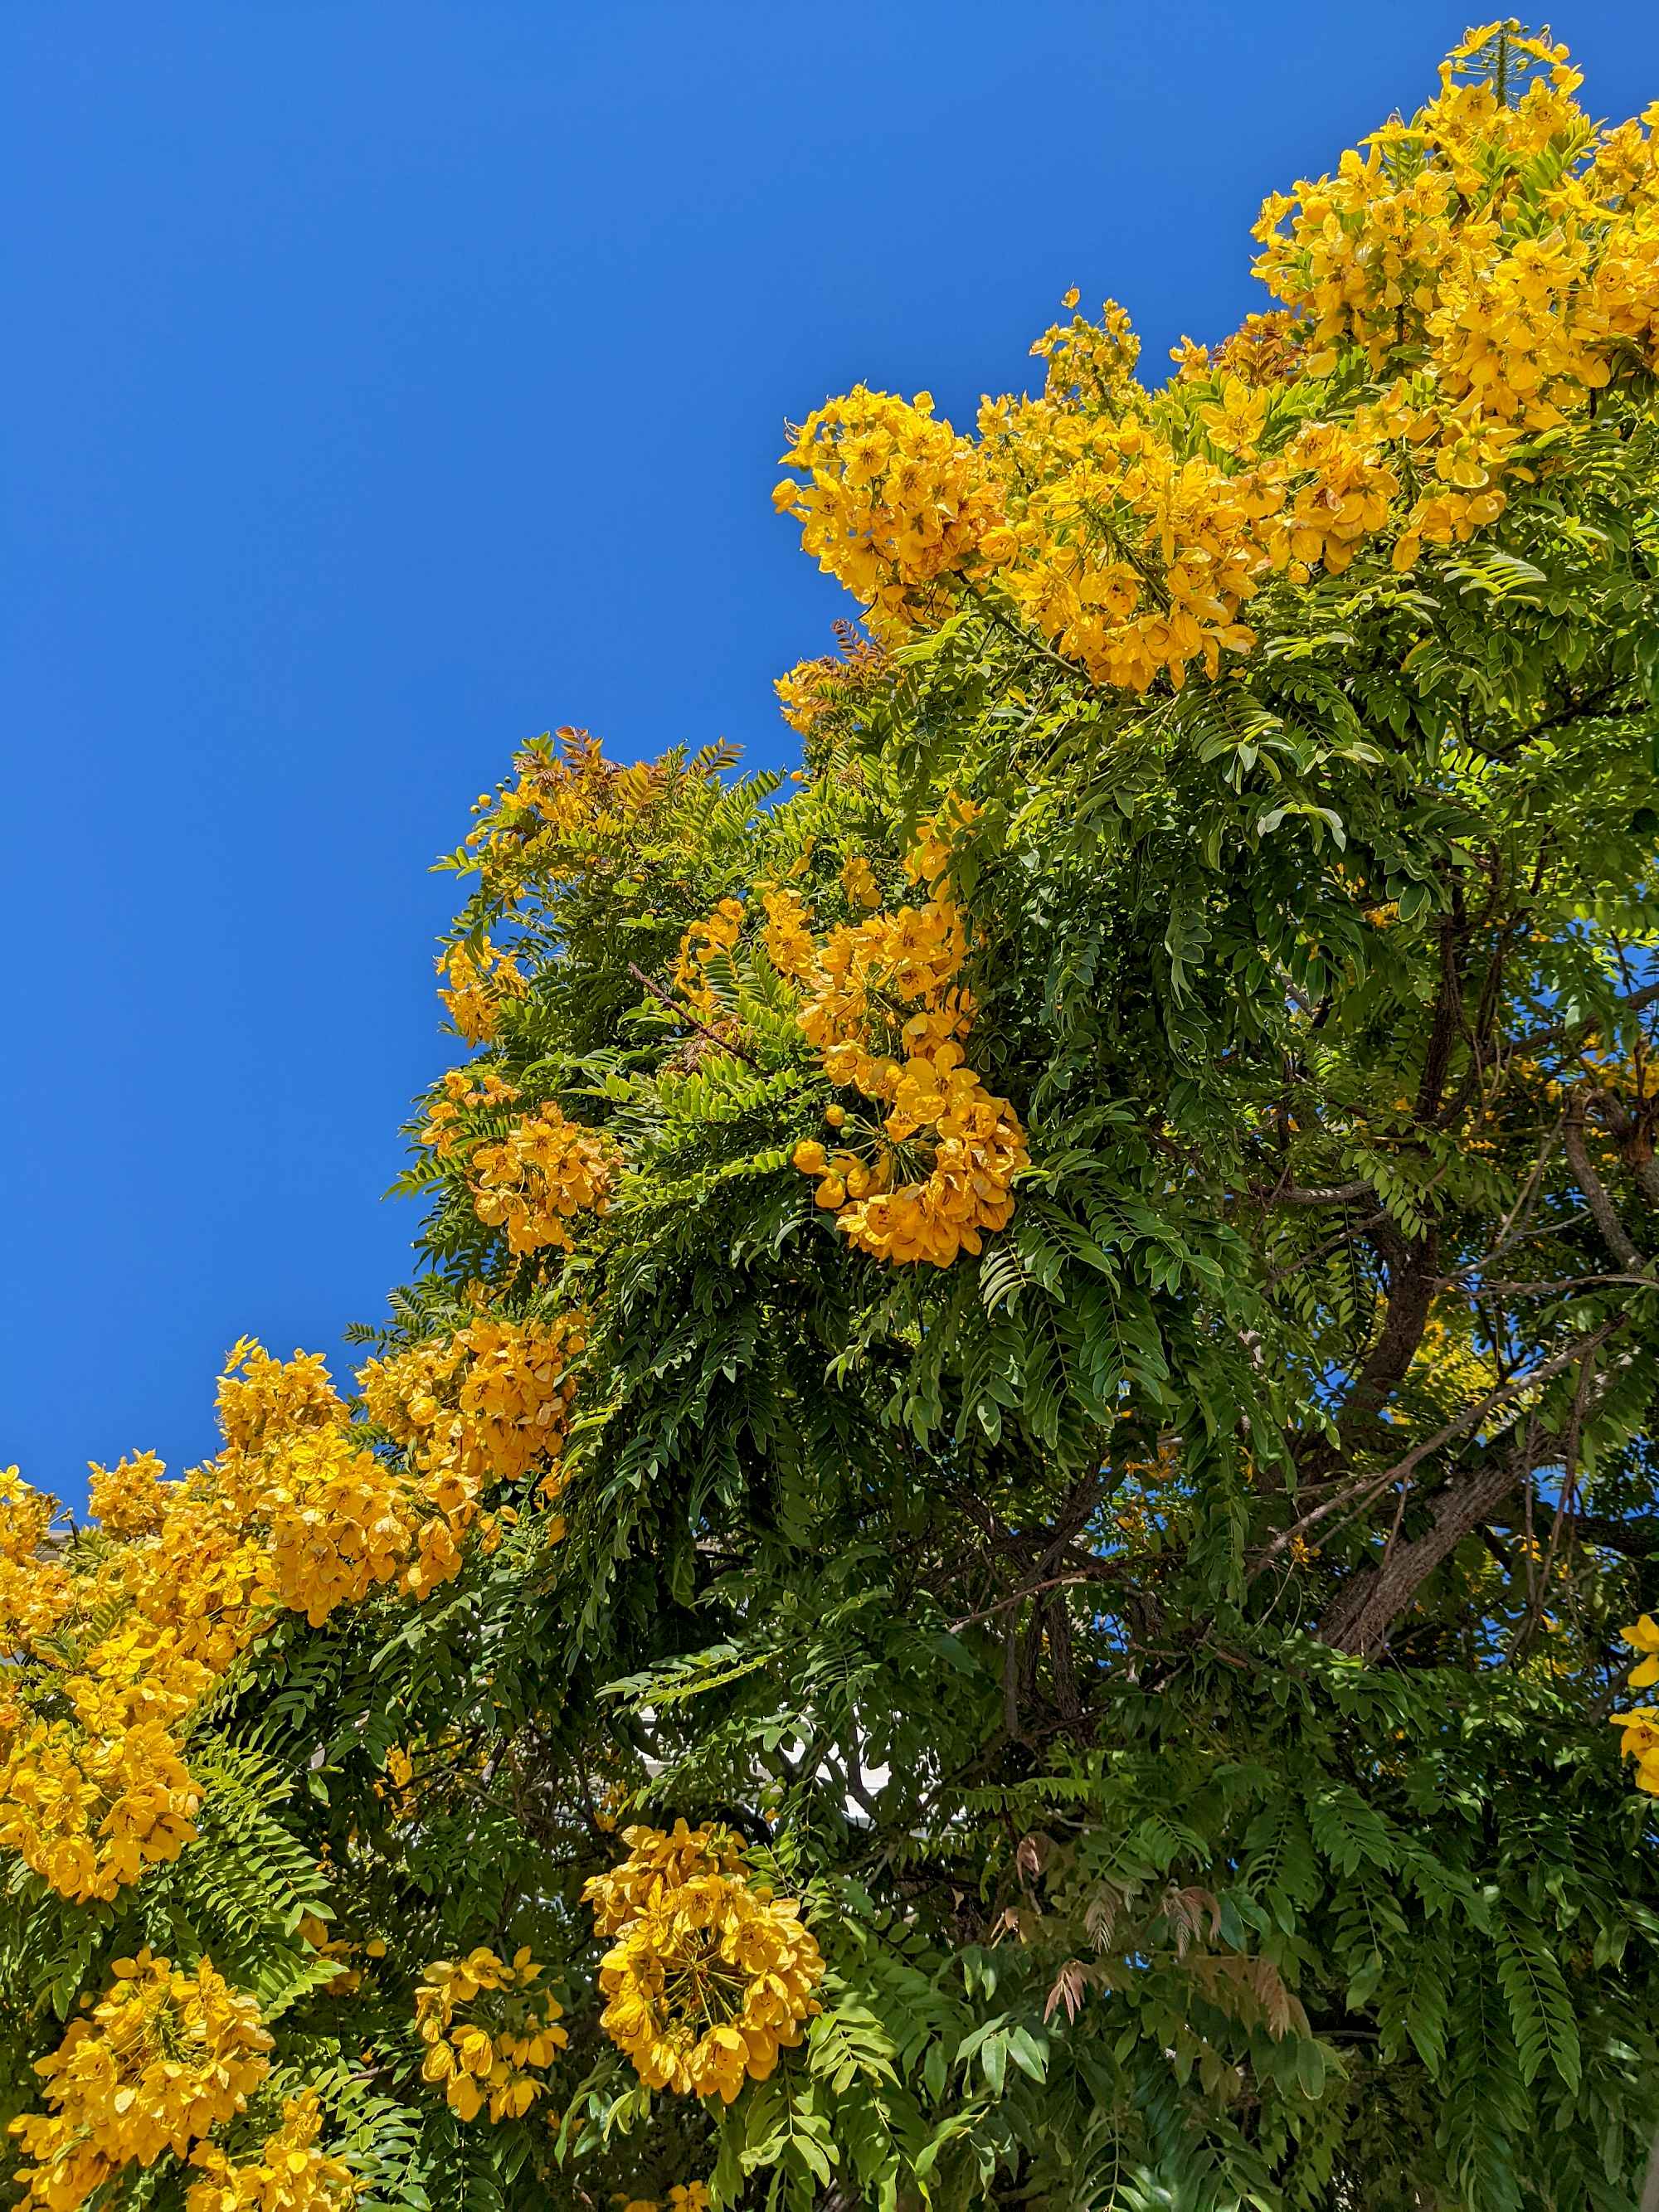 looking up at a tree with bright yellow blooms and green leaves, contrasted against a bright blue sky